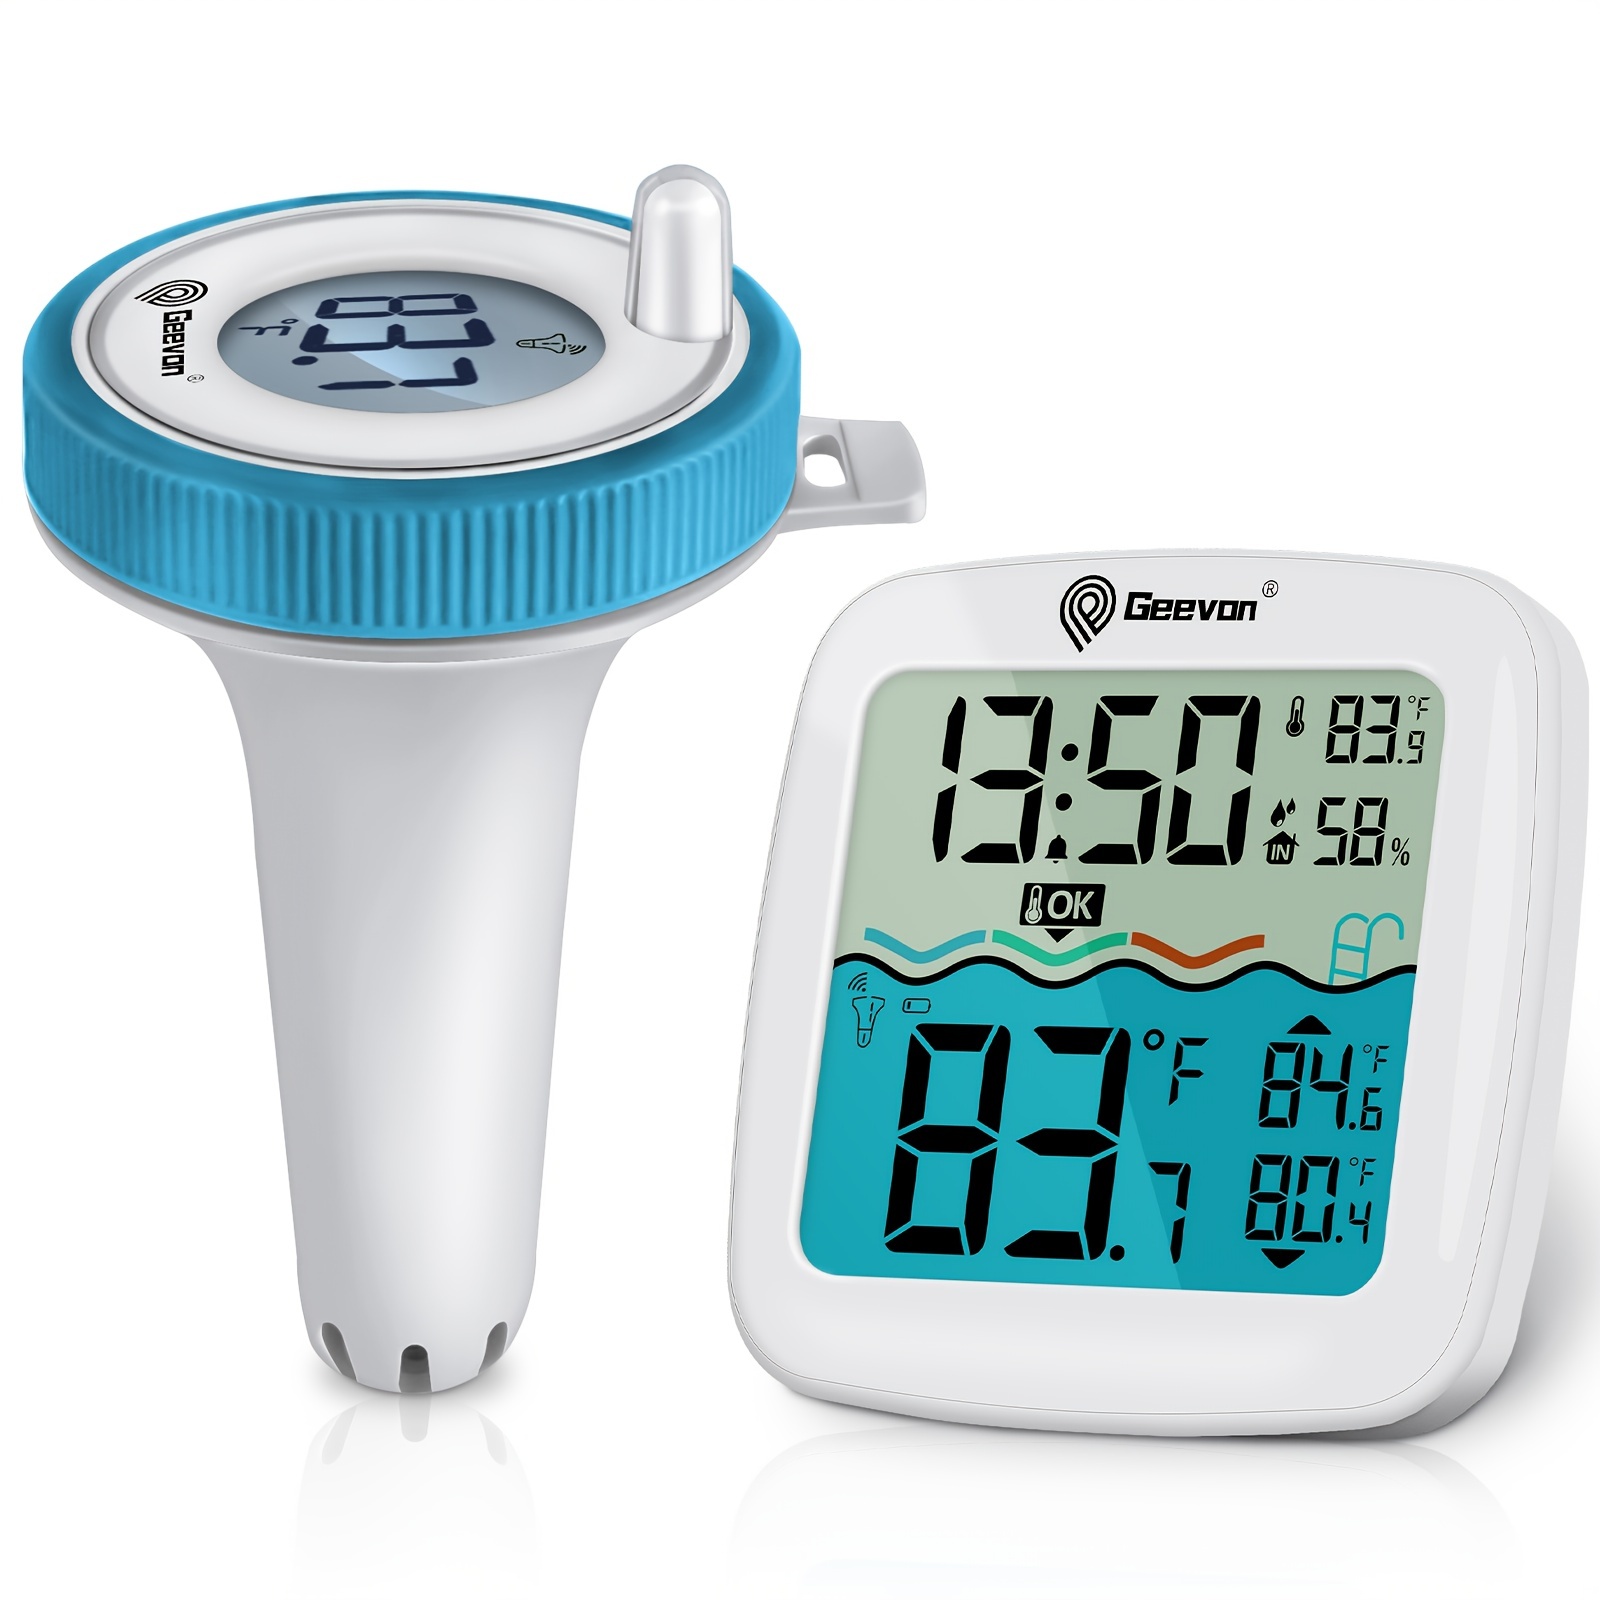 Baldr Wireless Pool Thermometer - Accurate Swimming Pool and Pond Temperature Monitor with Indoor Display